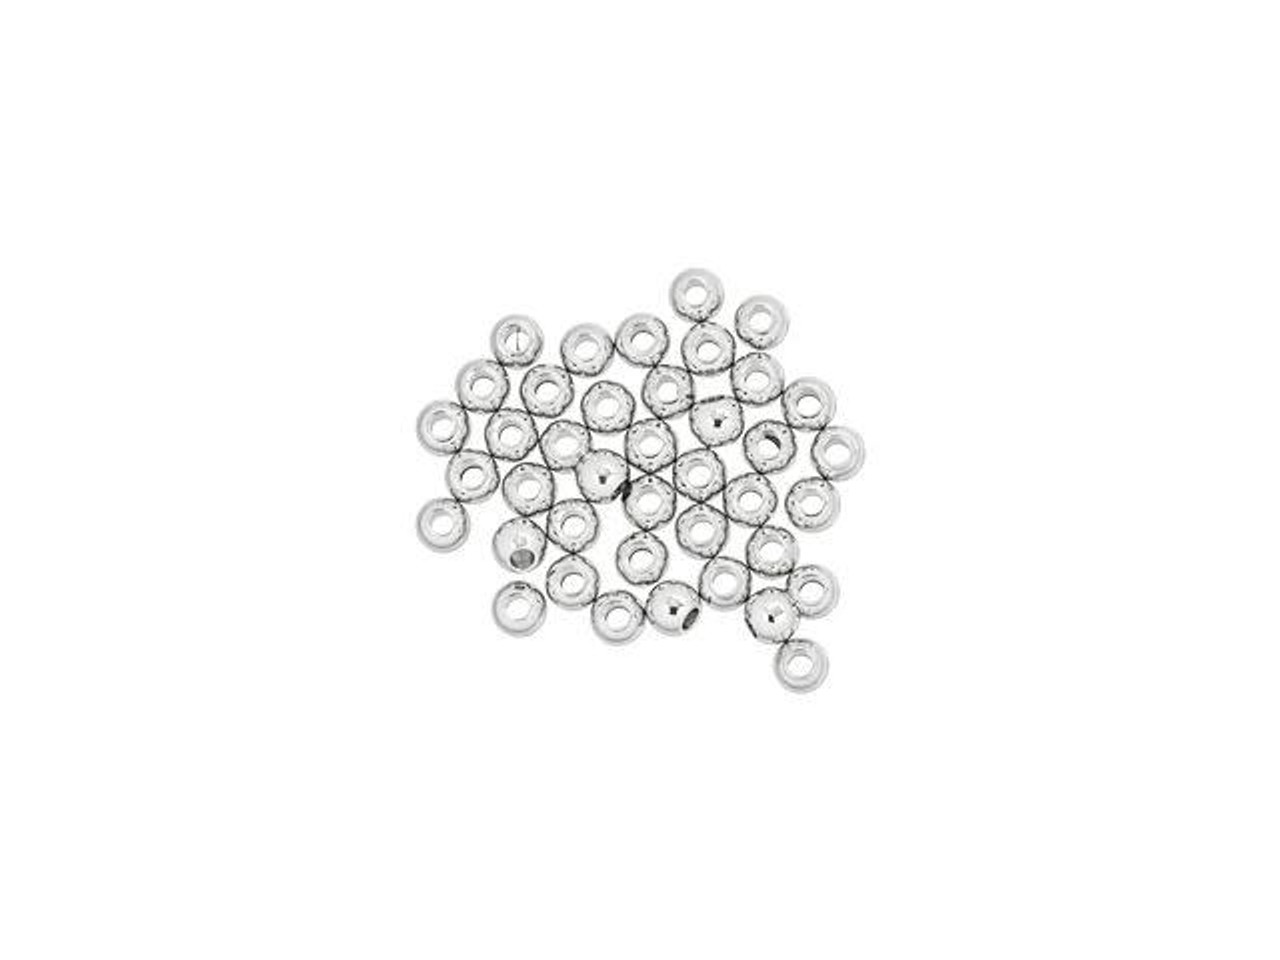 Beading Supplies :: Findings & Settings :: Pins :: 40pc hite